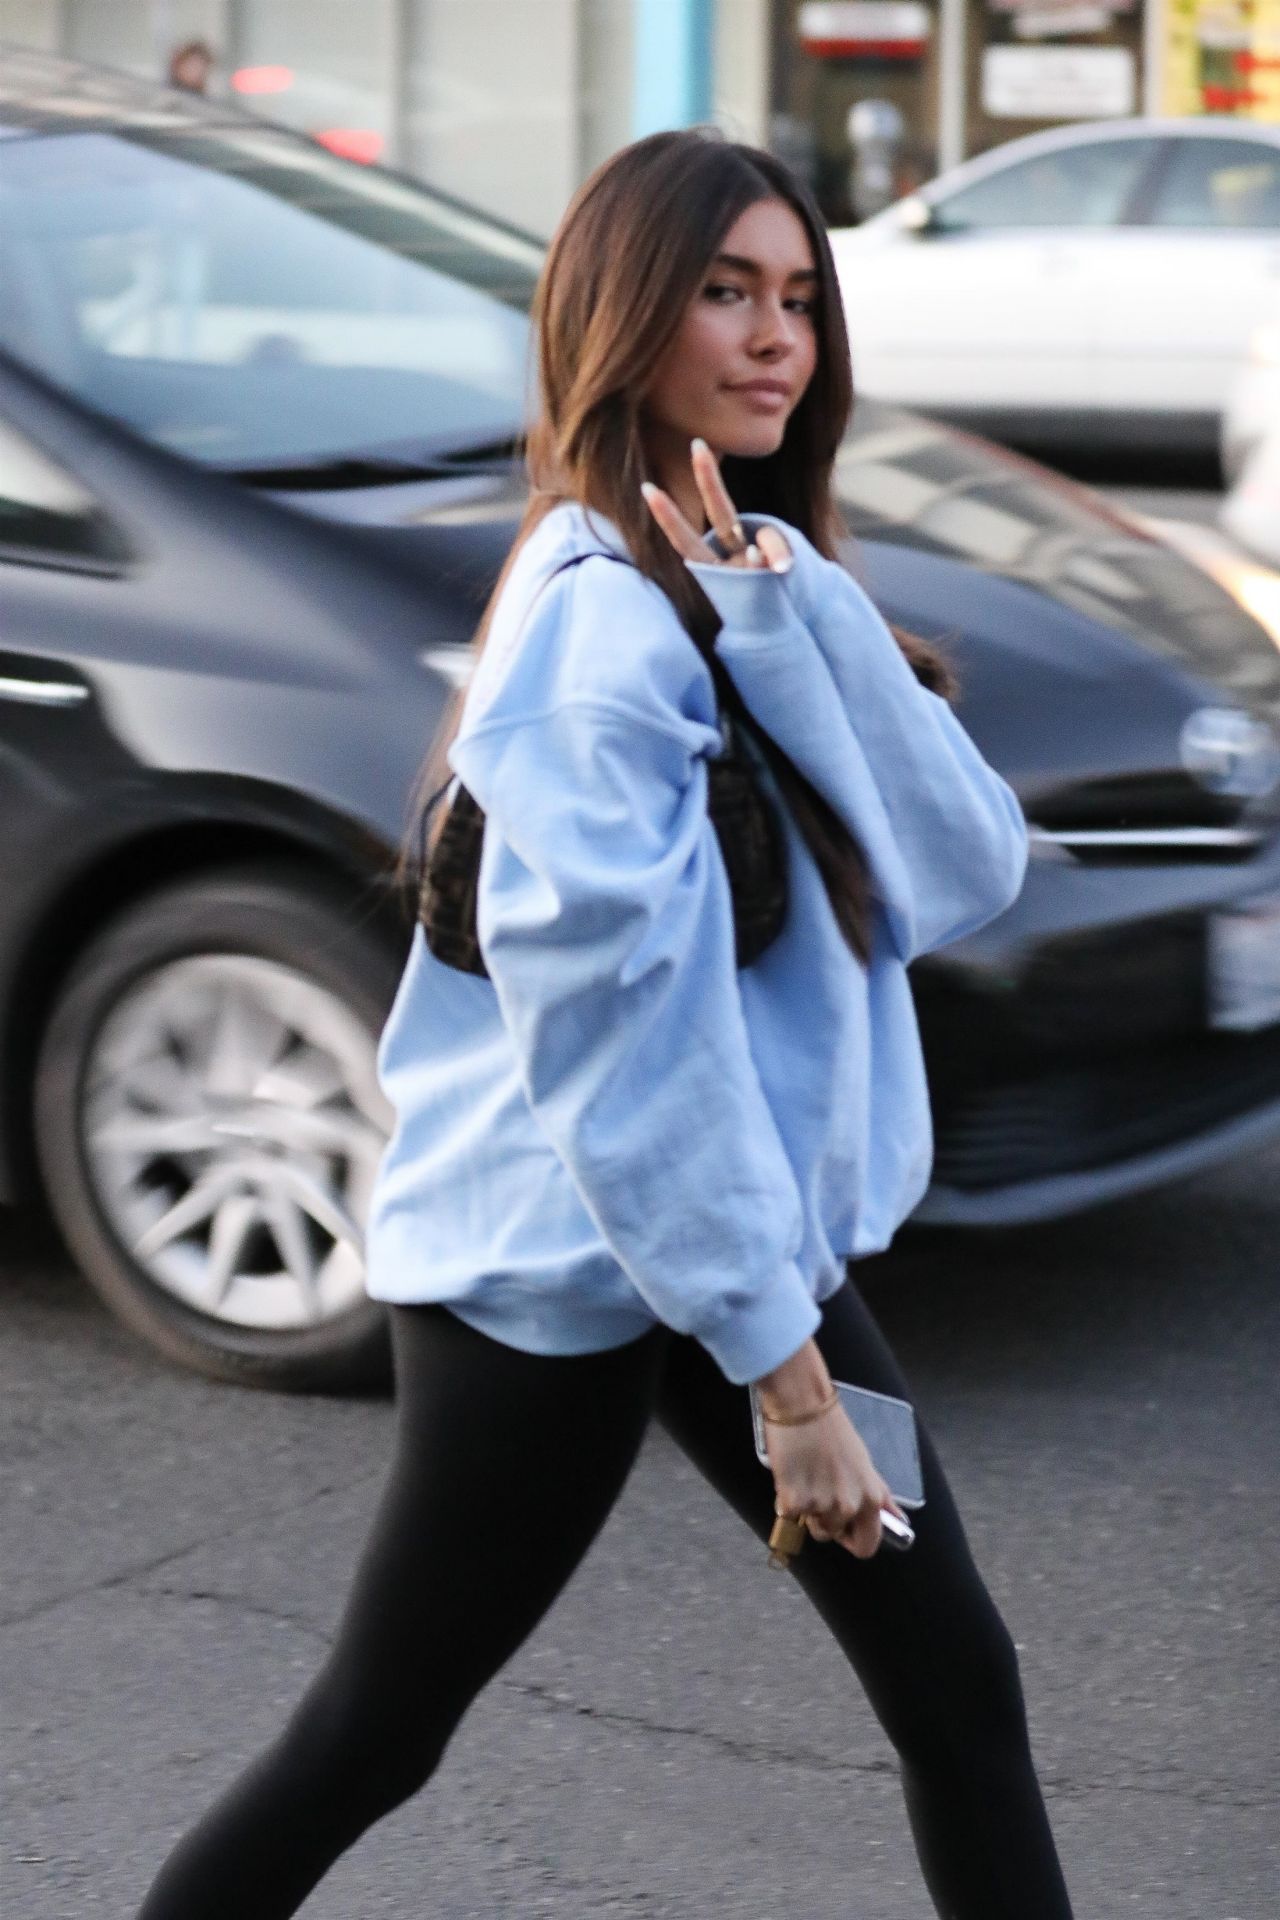 Madison Beer West Hollywood May 21, 2019 – Star Style